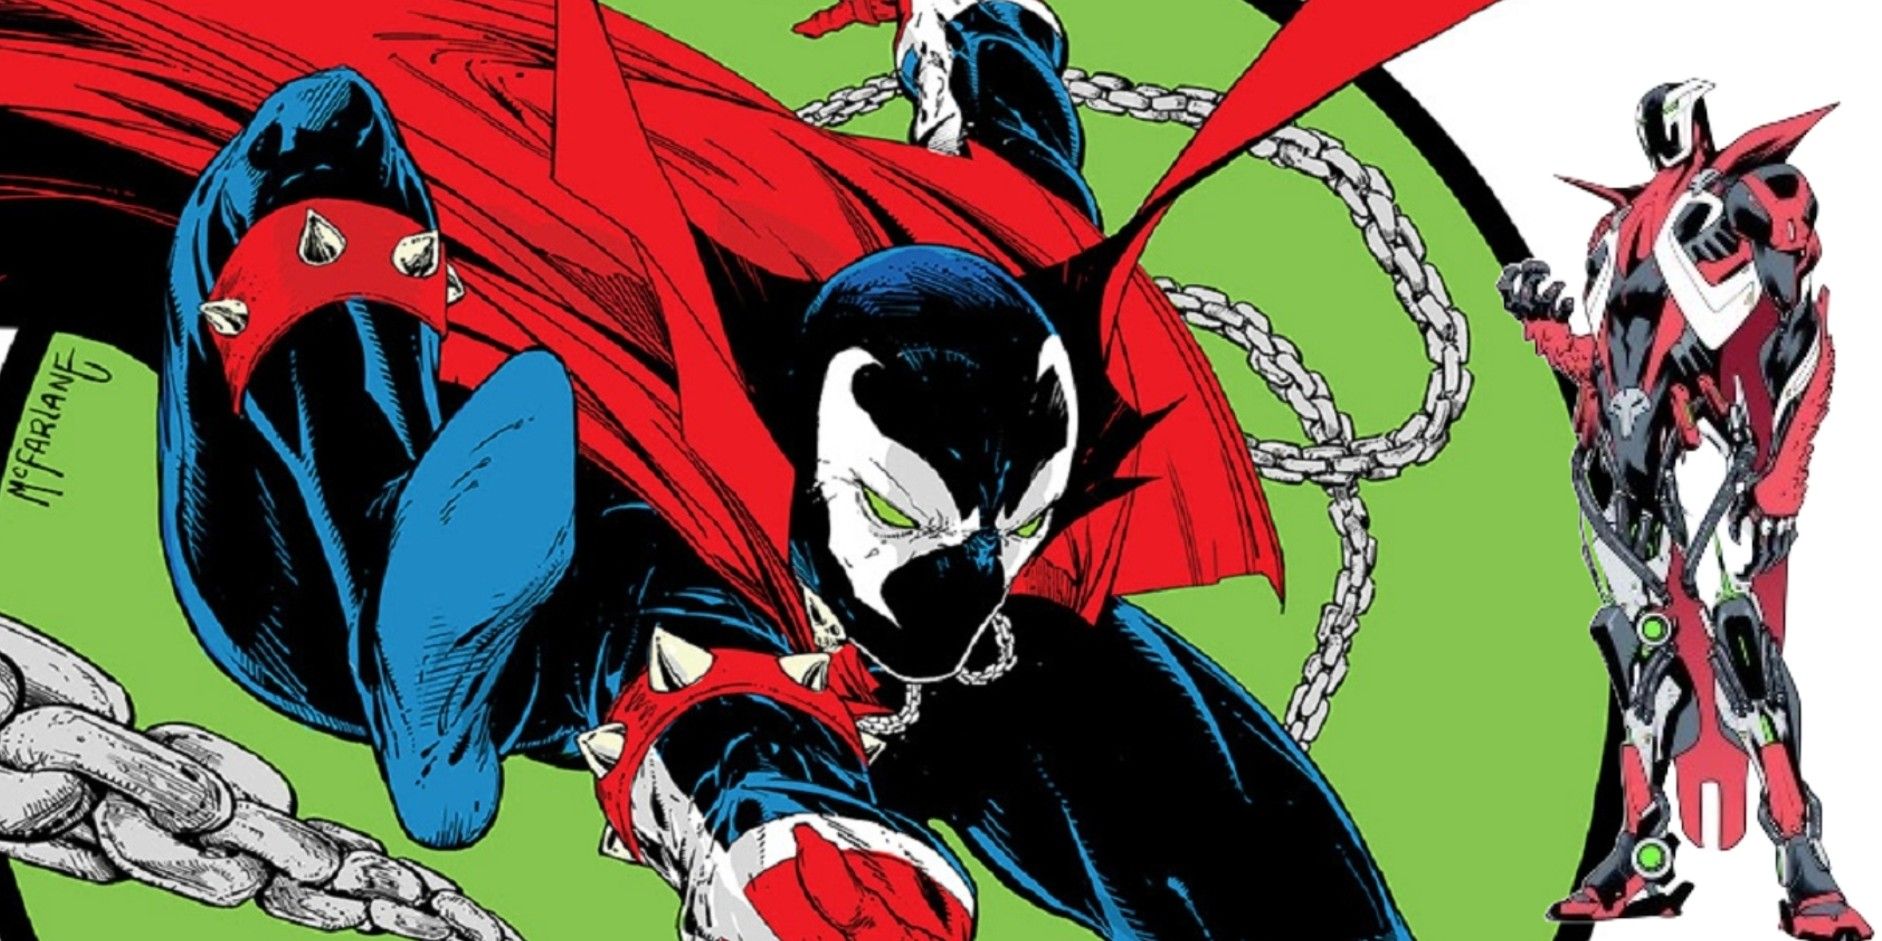 Spawn: 10 of the Most Spine Tingling Covers From the 1990s